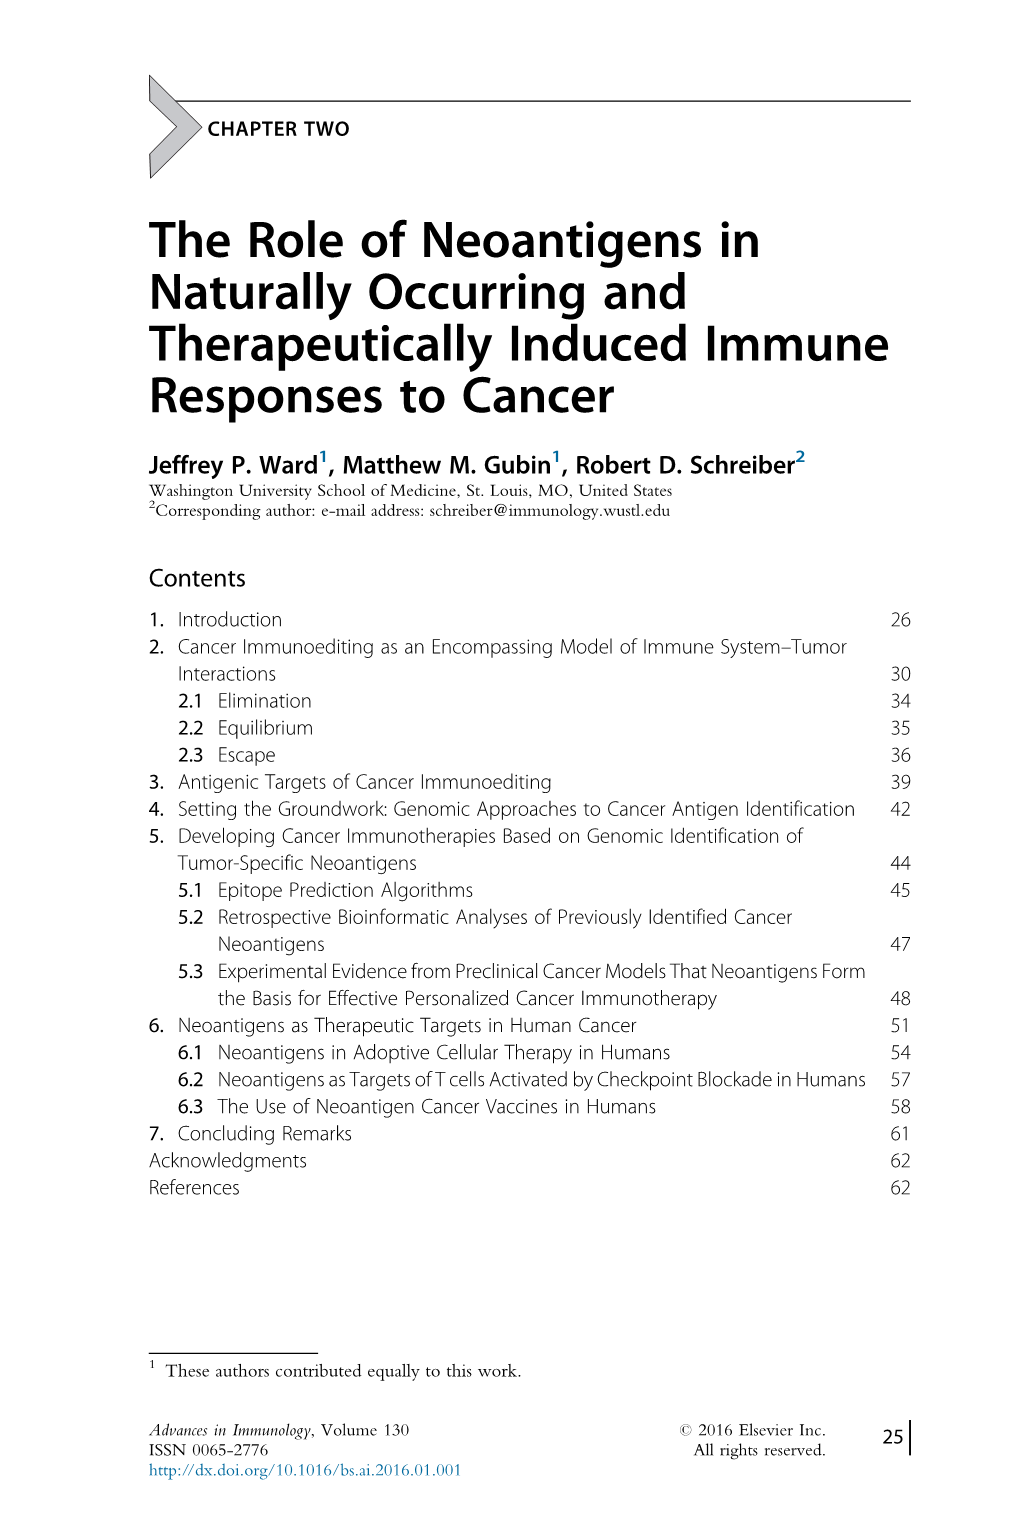 The Role of Neoantigens in Naturally Occurring and Therapeutically Induced Immune Responses to Cancer